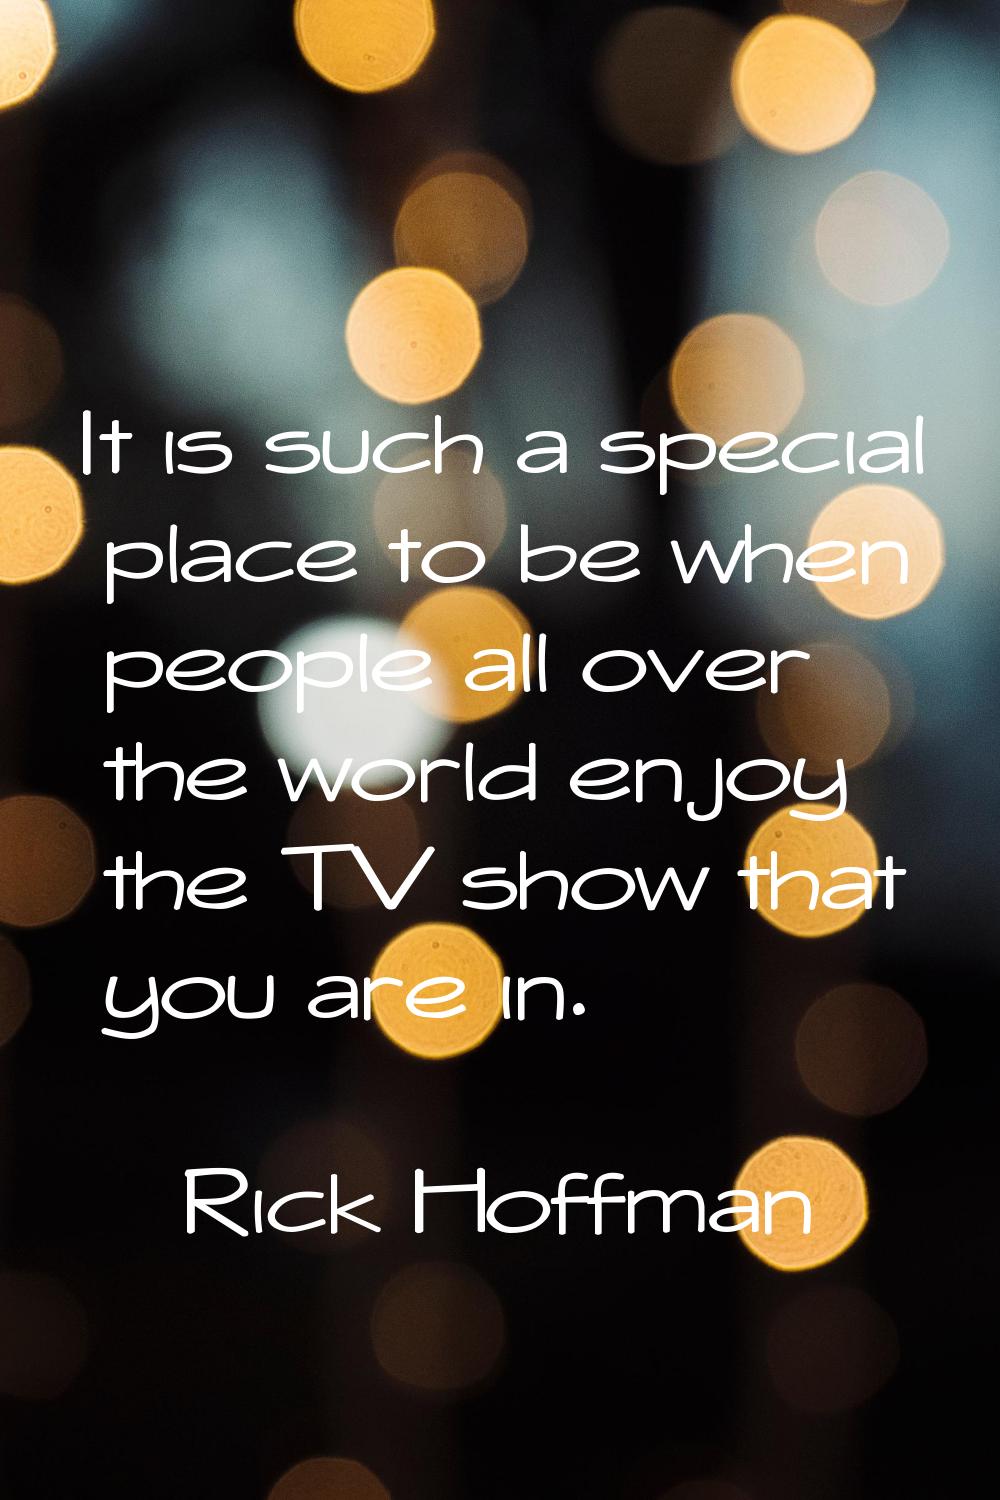 It is such a special place to be when people all over the world enjoy the TV show that you are in.